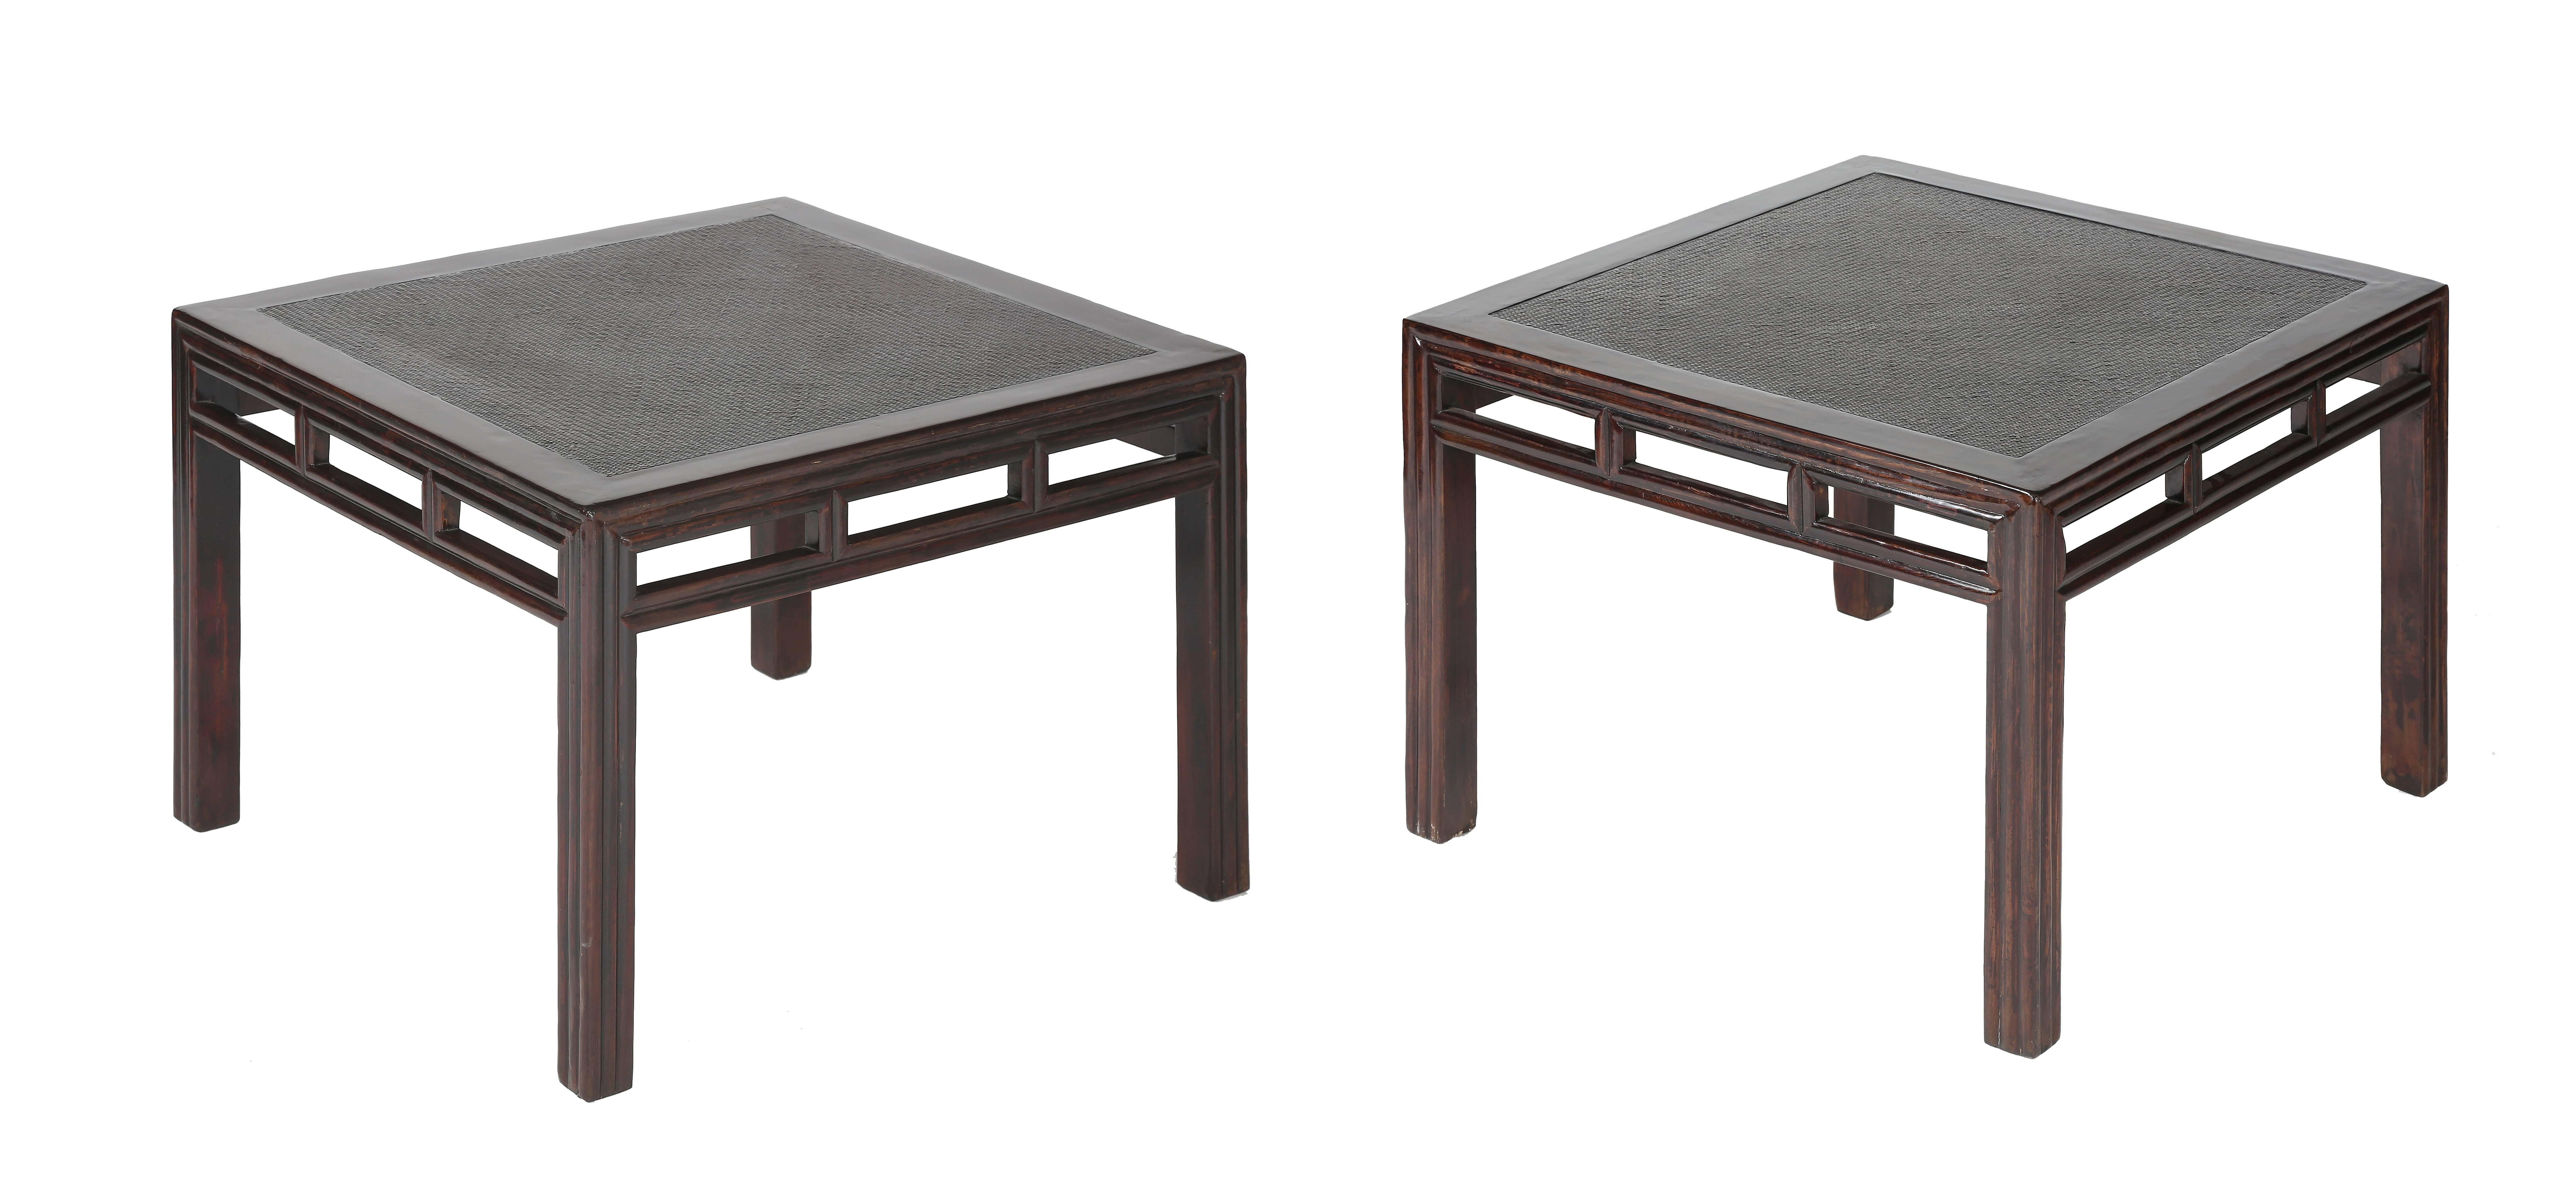 Pair of meditation stools

The fine pair with a cane top, enclosed within a flush-sided square frame, supported on square-sectioned legs, braced with straight stretchers and vertical struts, all sides carved with lipped molding.

Elmwood (Yu